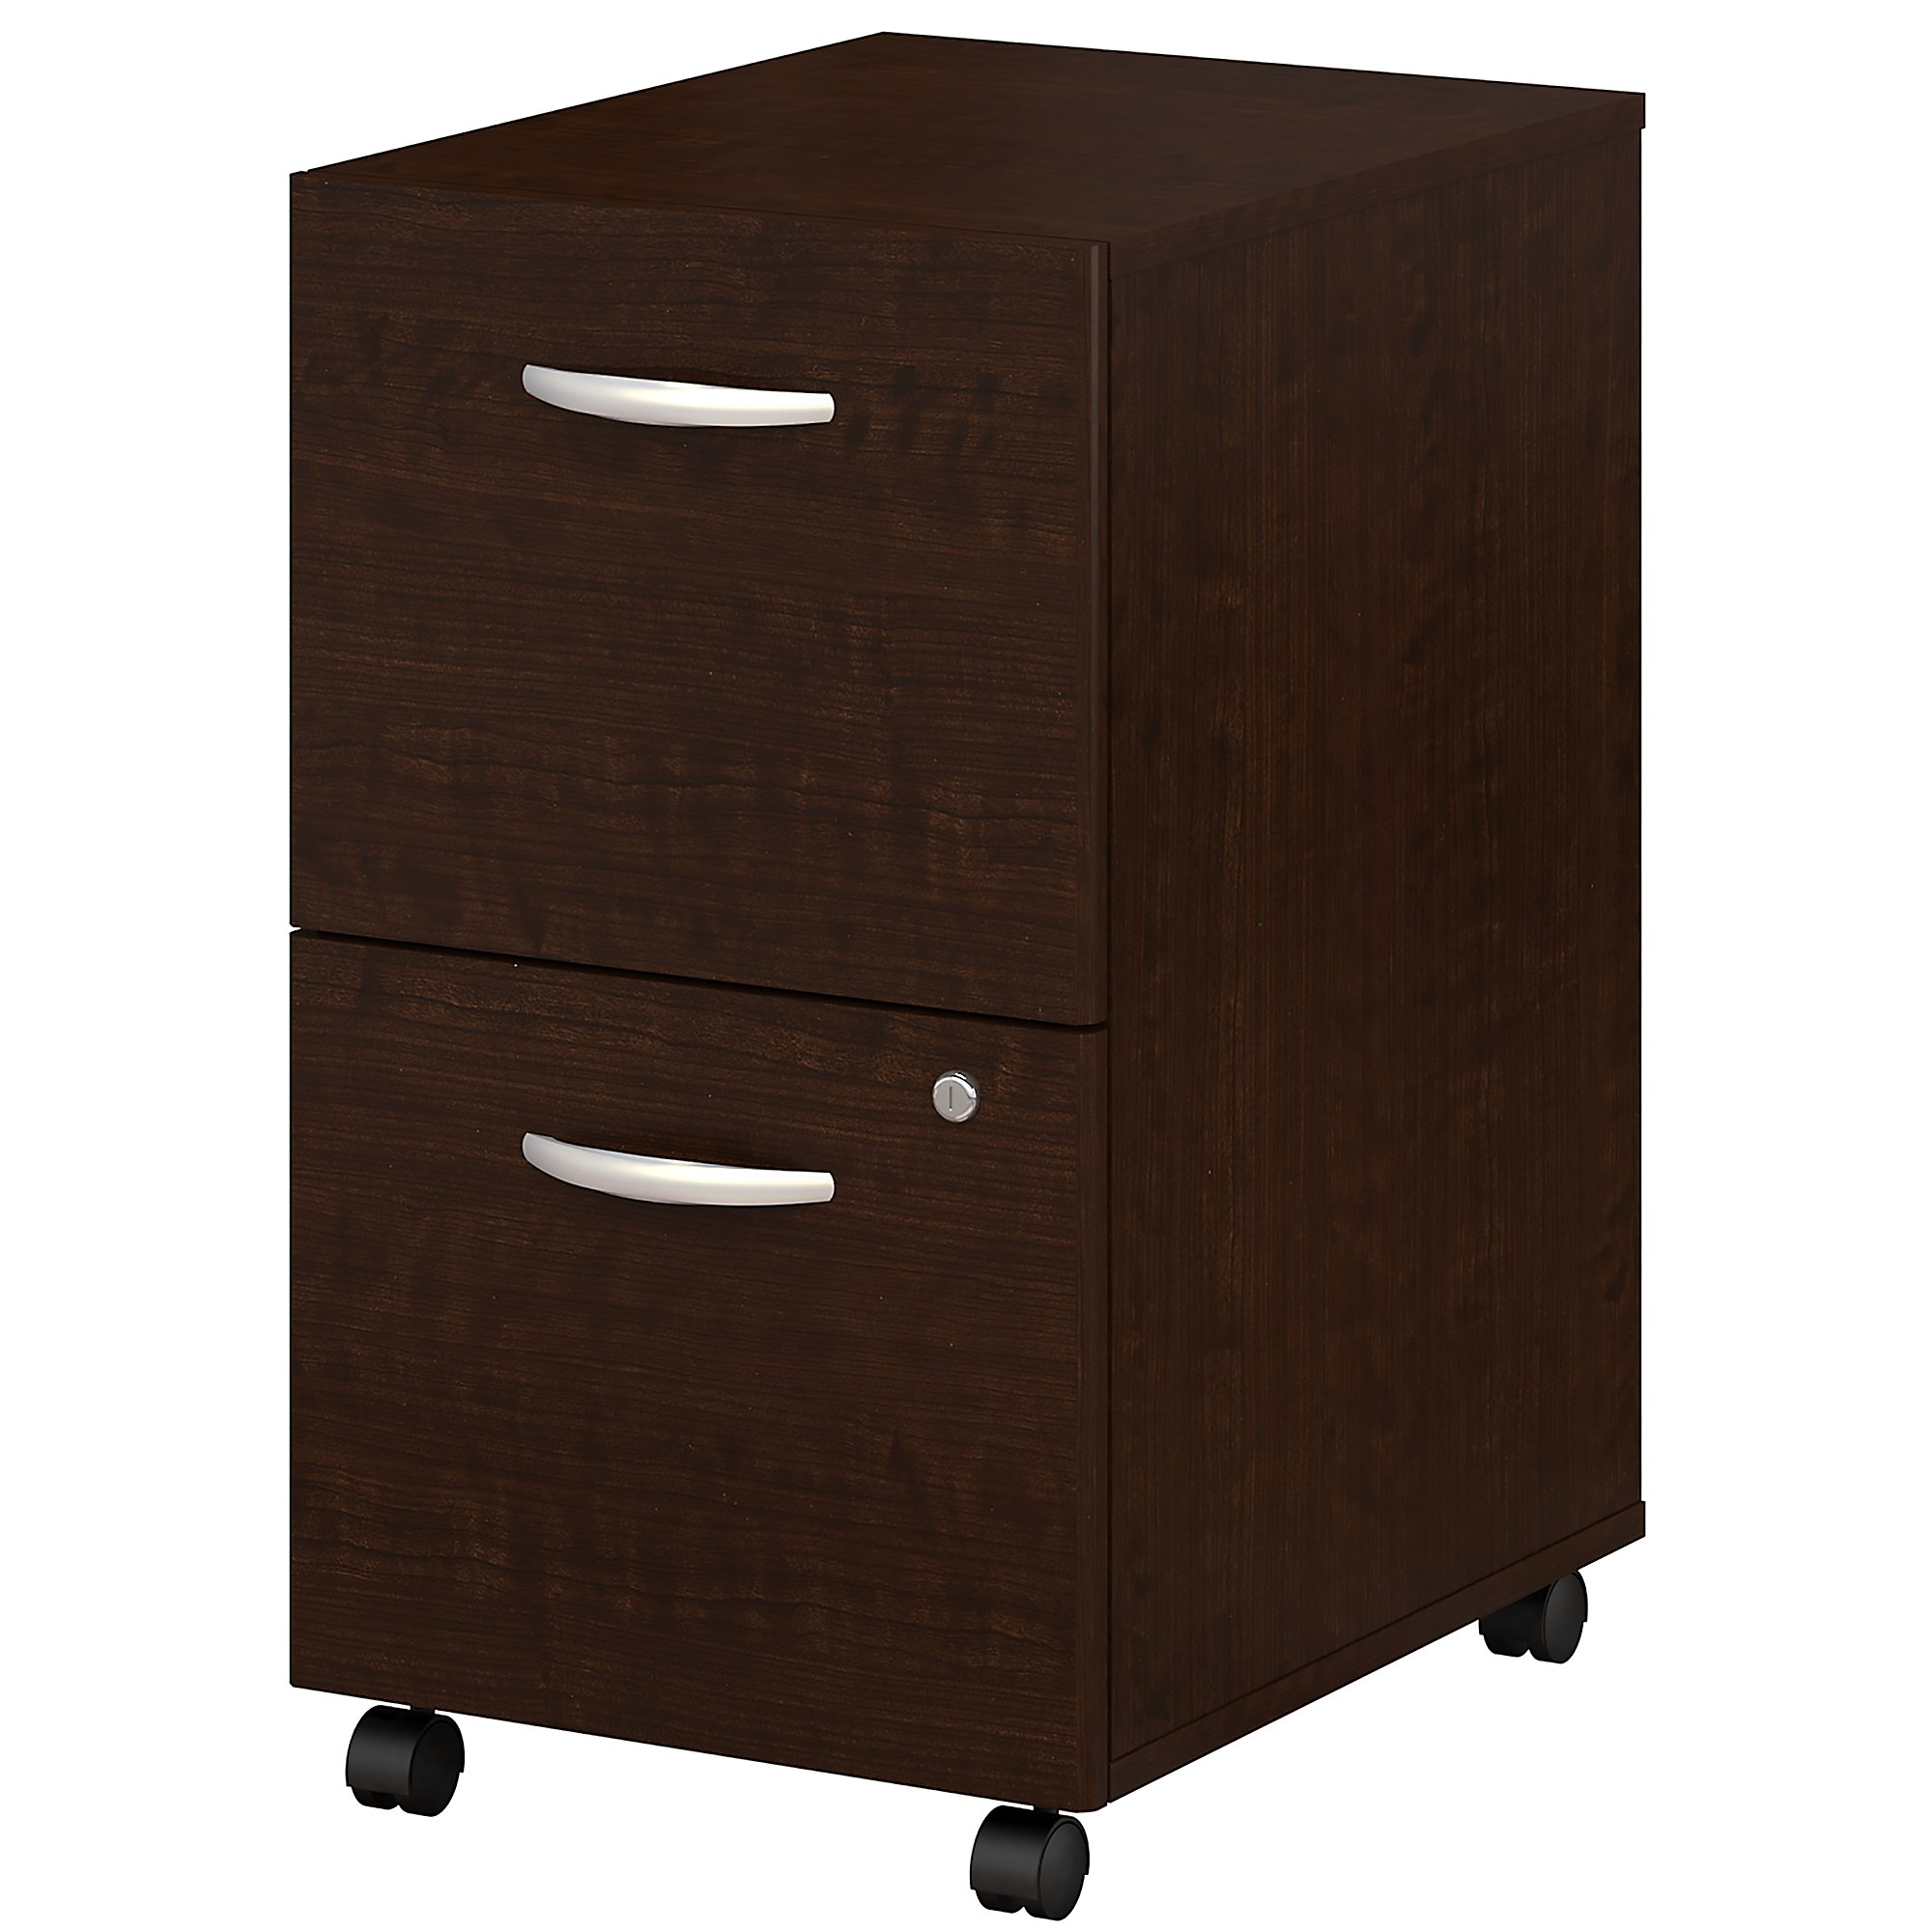 Classic Shell Desk 2 Drawer Filing Storage Mobile Pedestal File throughout proportions 2000 X 2000